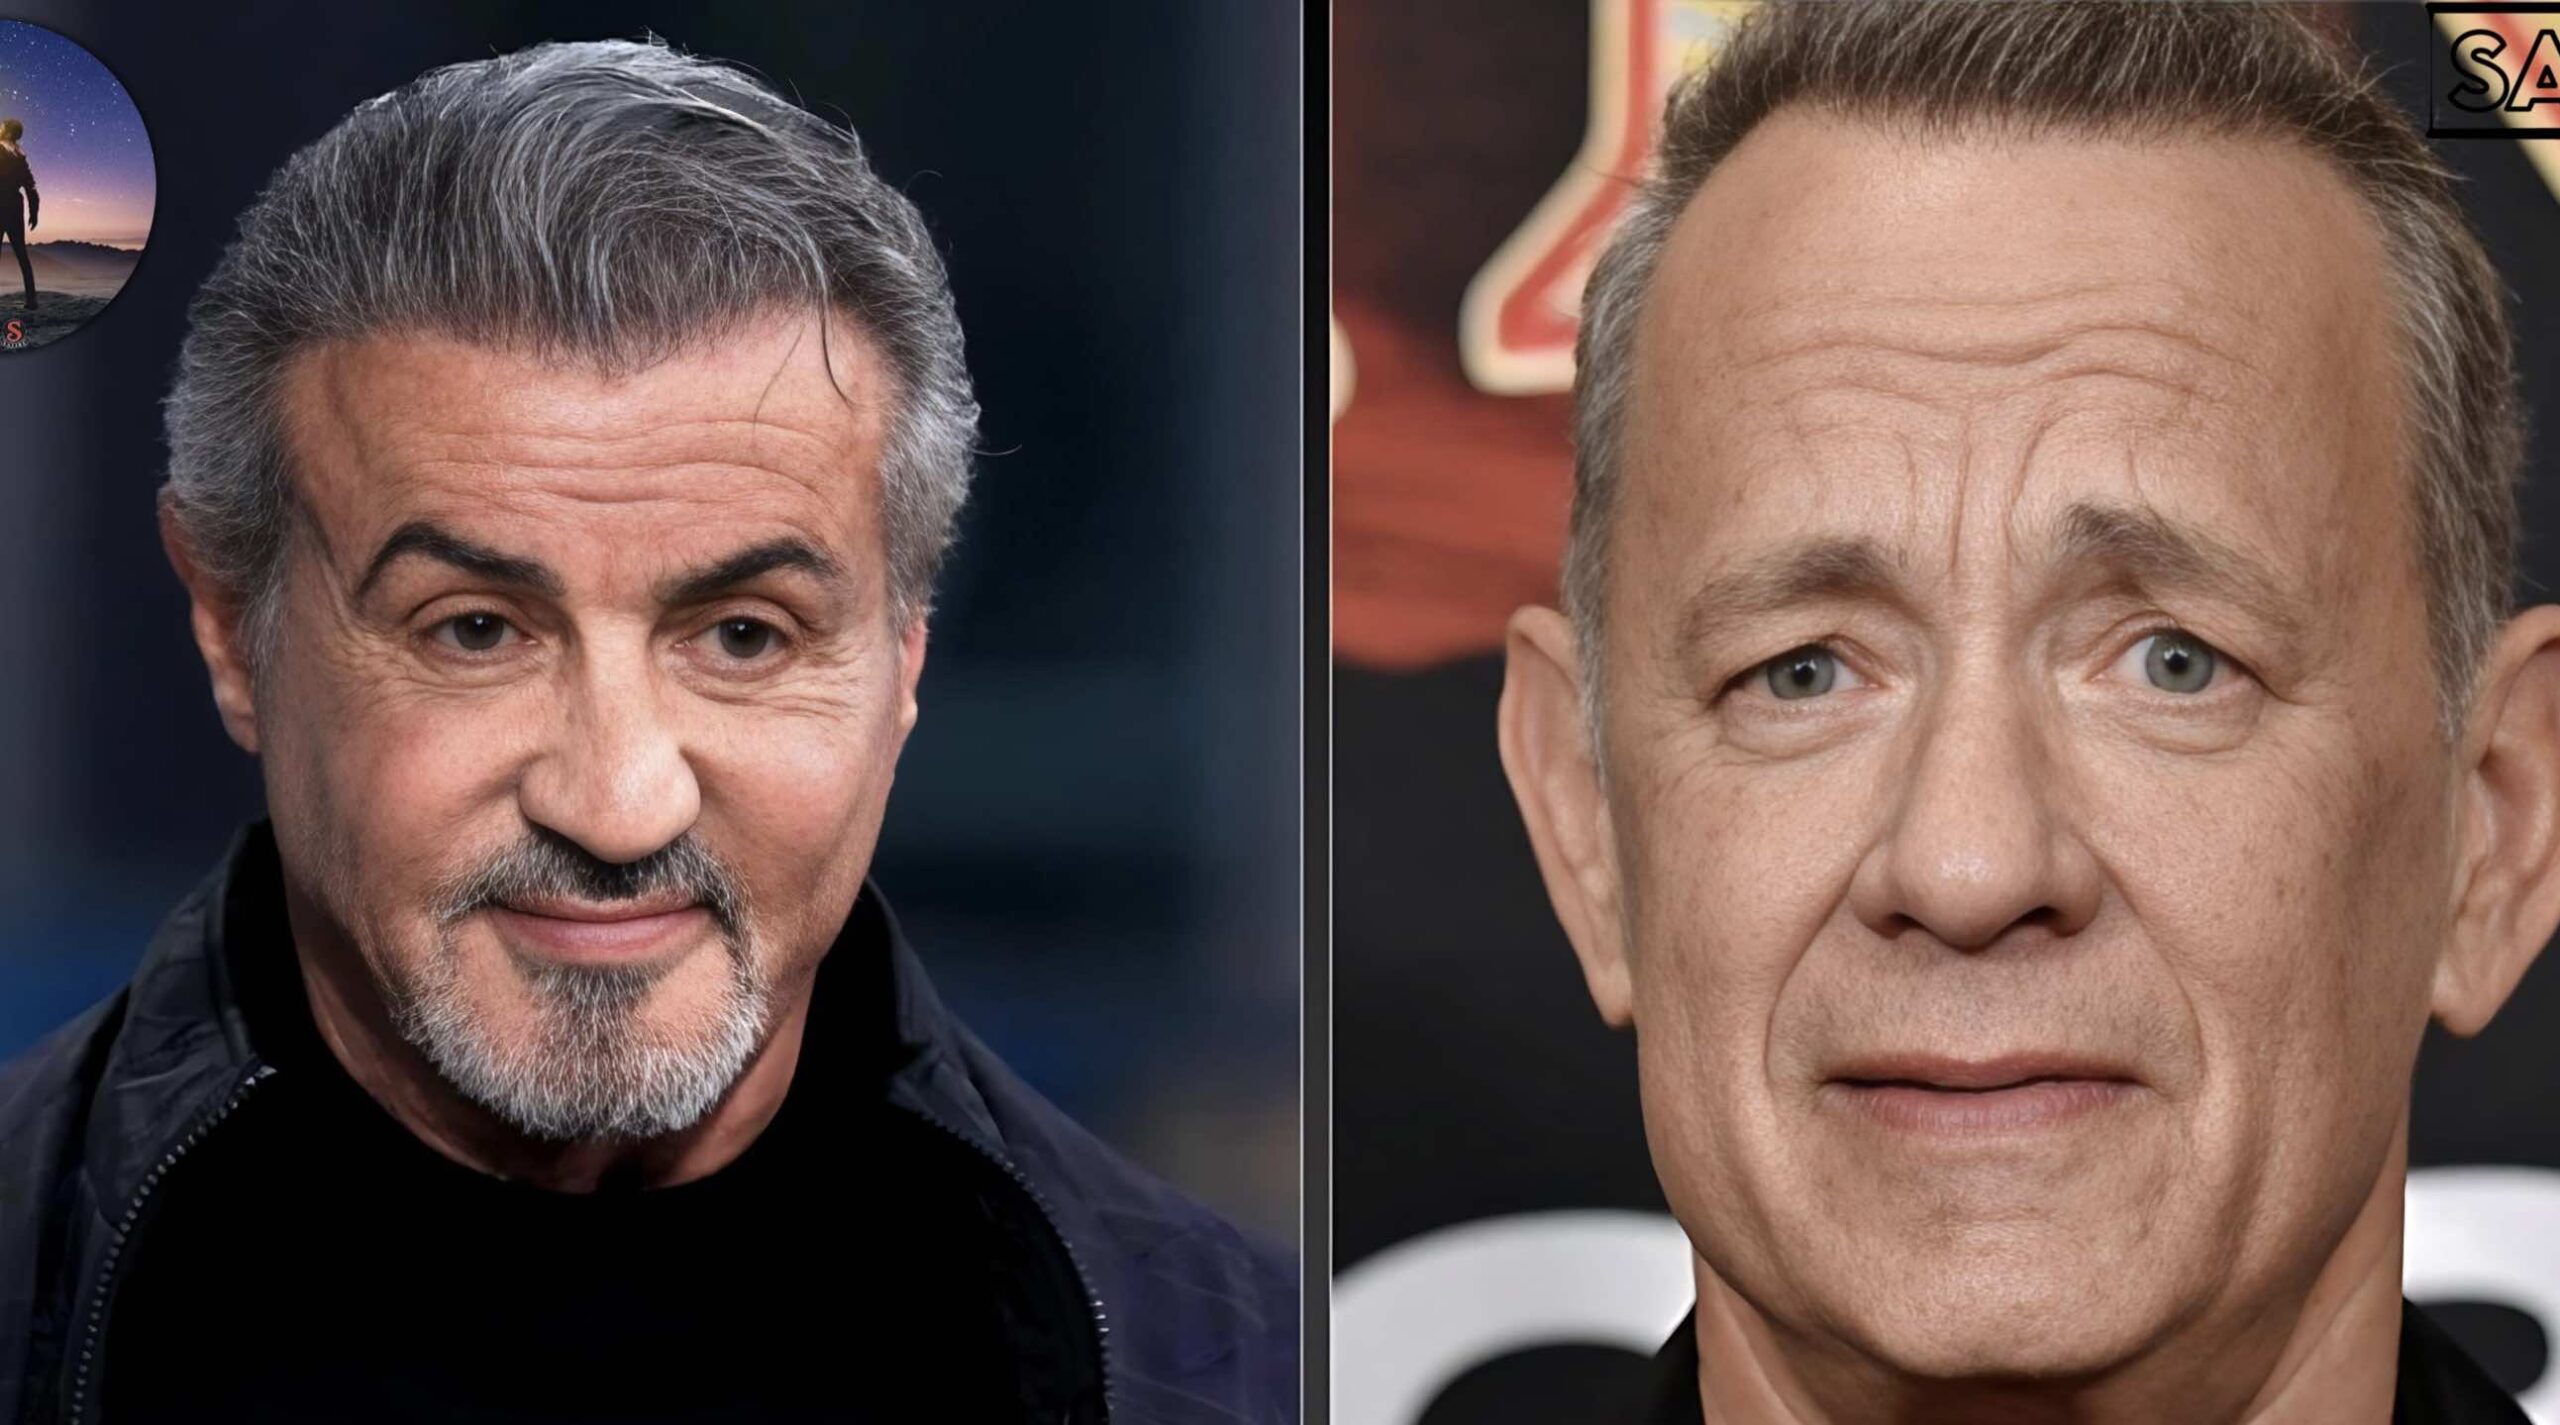 Sylvester Stallone has decided not to collaborate with Tom Hanks, stating that Hanks “weirds me